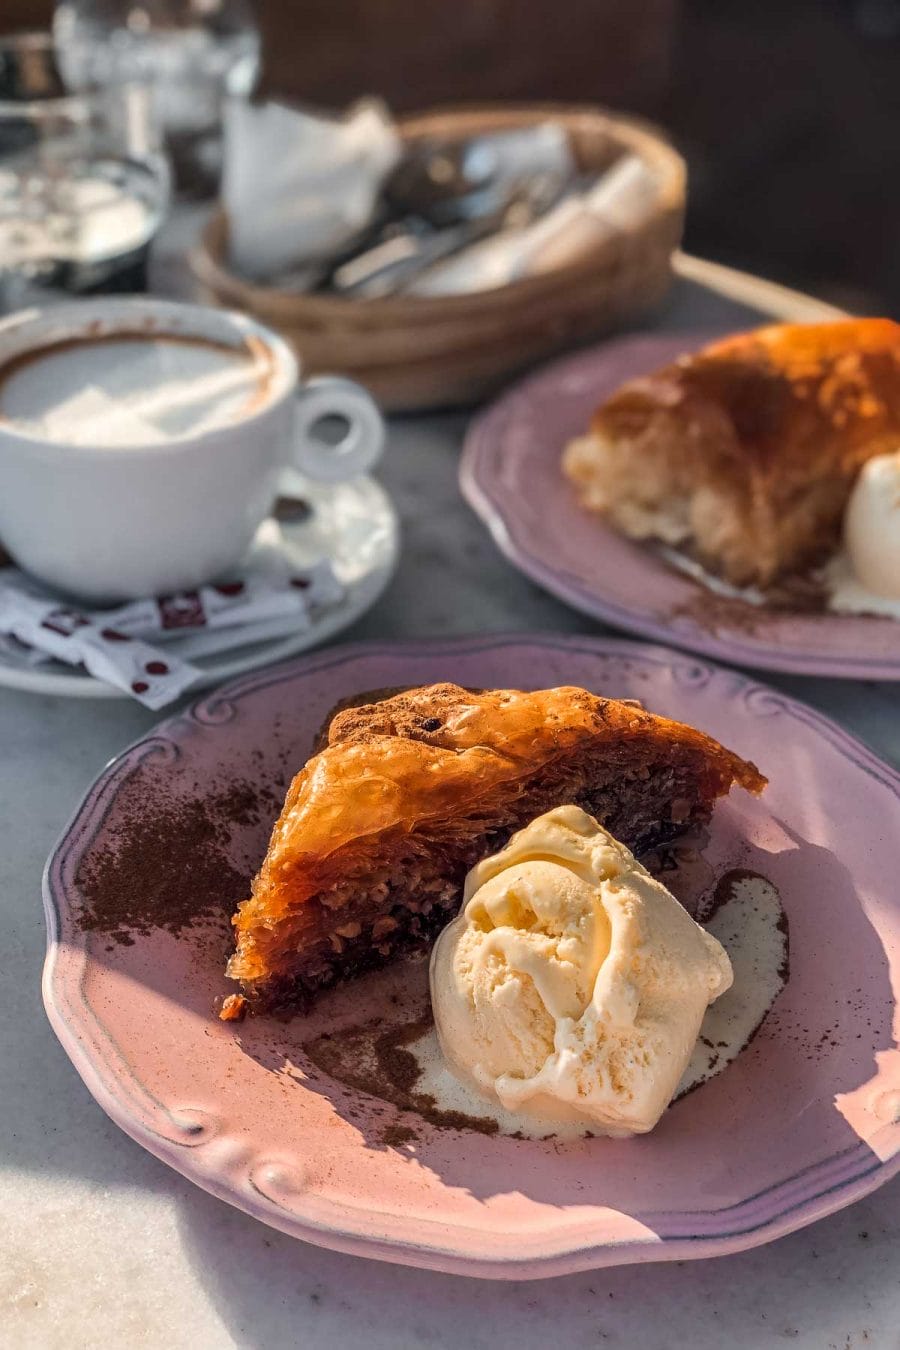 Baklava and a cup of coffee in Oia, Santorini